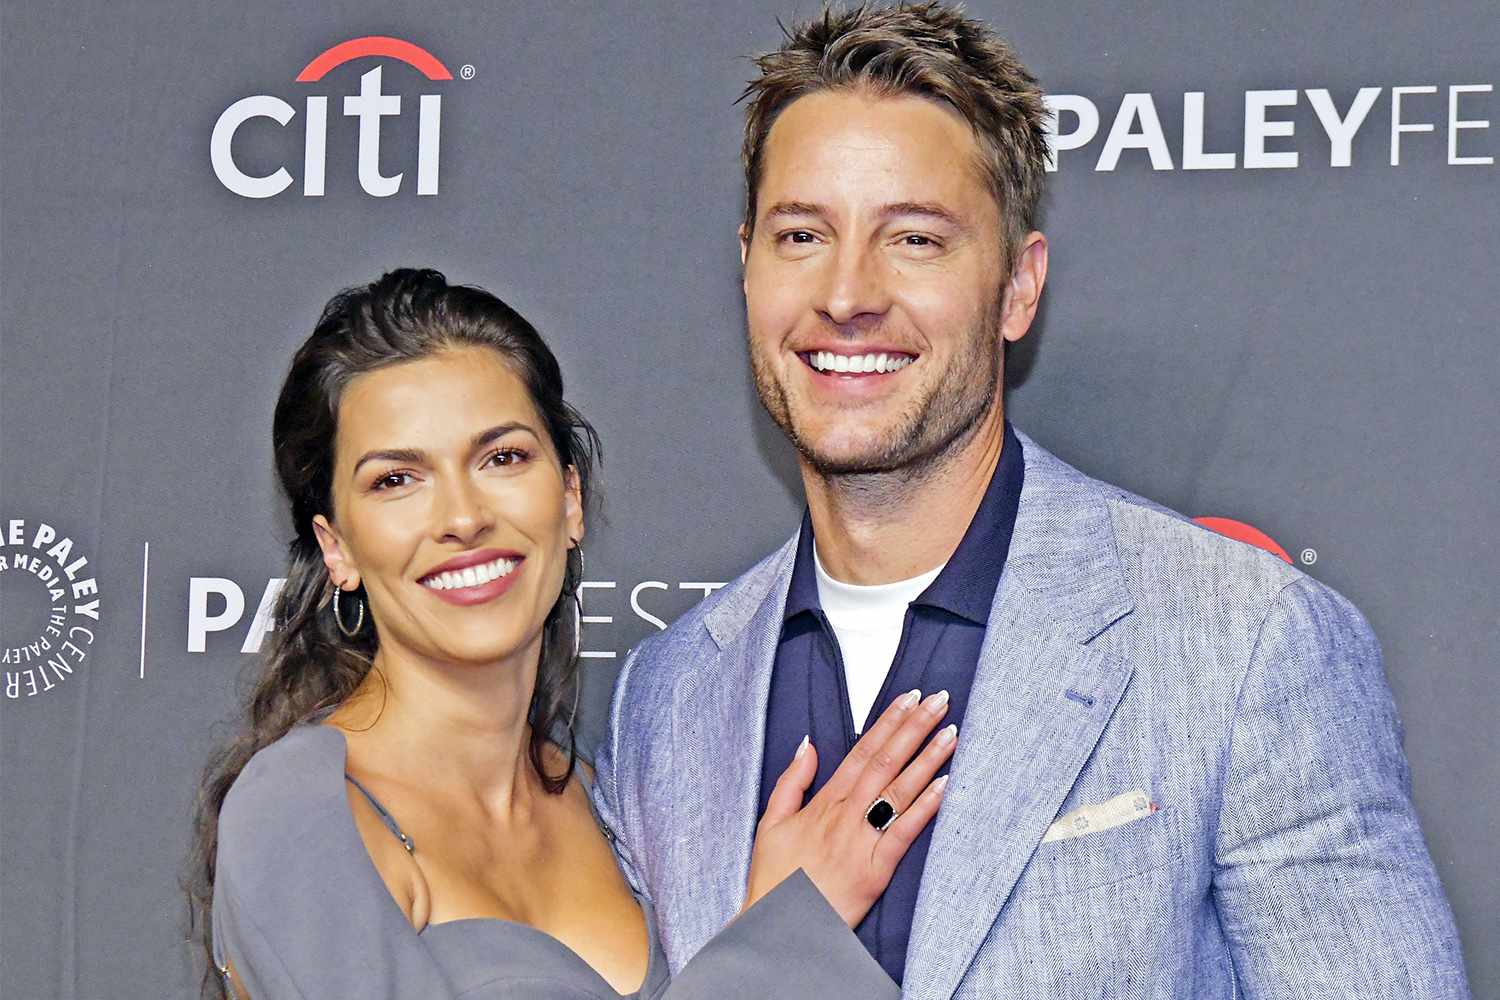 HOLLYWOOD, CALIFORNIA - APRIL 02: (L-R) Sofia Pernas and Justin Hartley attend the 39th annual PaleyFest LA - "This Is Us" at Dolby Theatre on April 02, 2022 in Hollywood, California. (Photo by Rodin Eckenroth/FilmMagic)